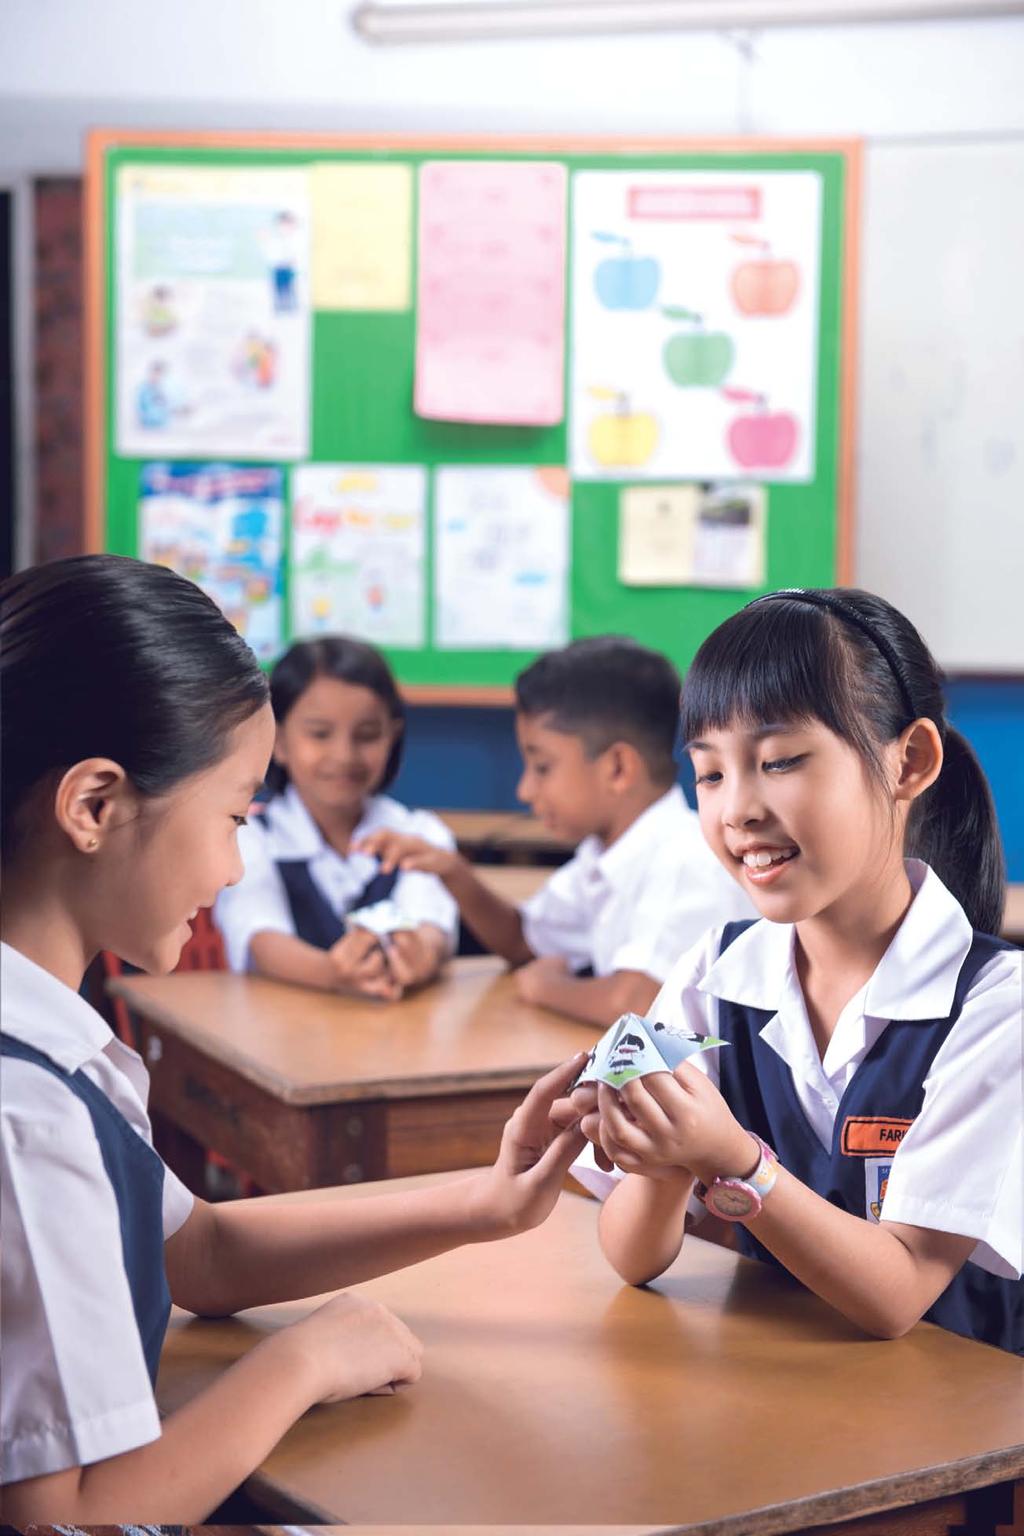 It consists of two modules a Primary School Module called the Nestlé Healthy Kids Programme, and the Secondary School Module called Healthy Lifestyle Programme (Program Cara Hidup Sihat).